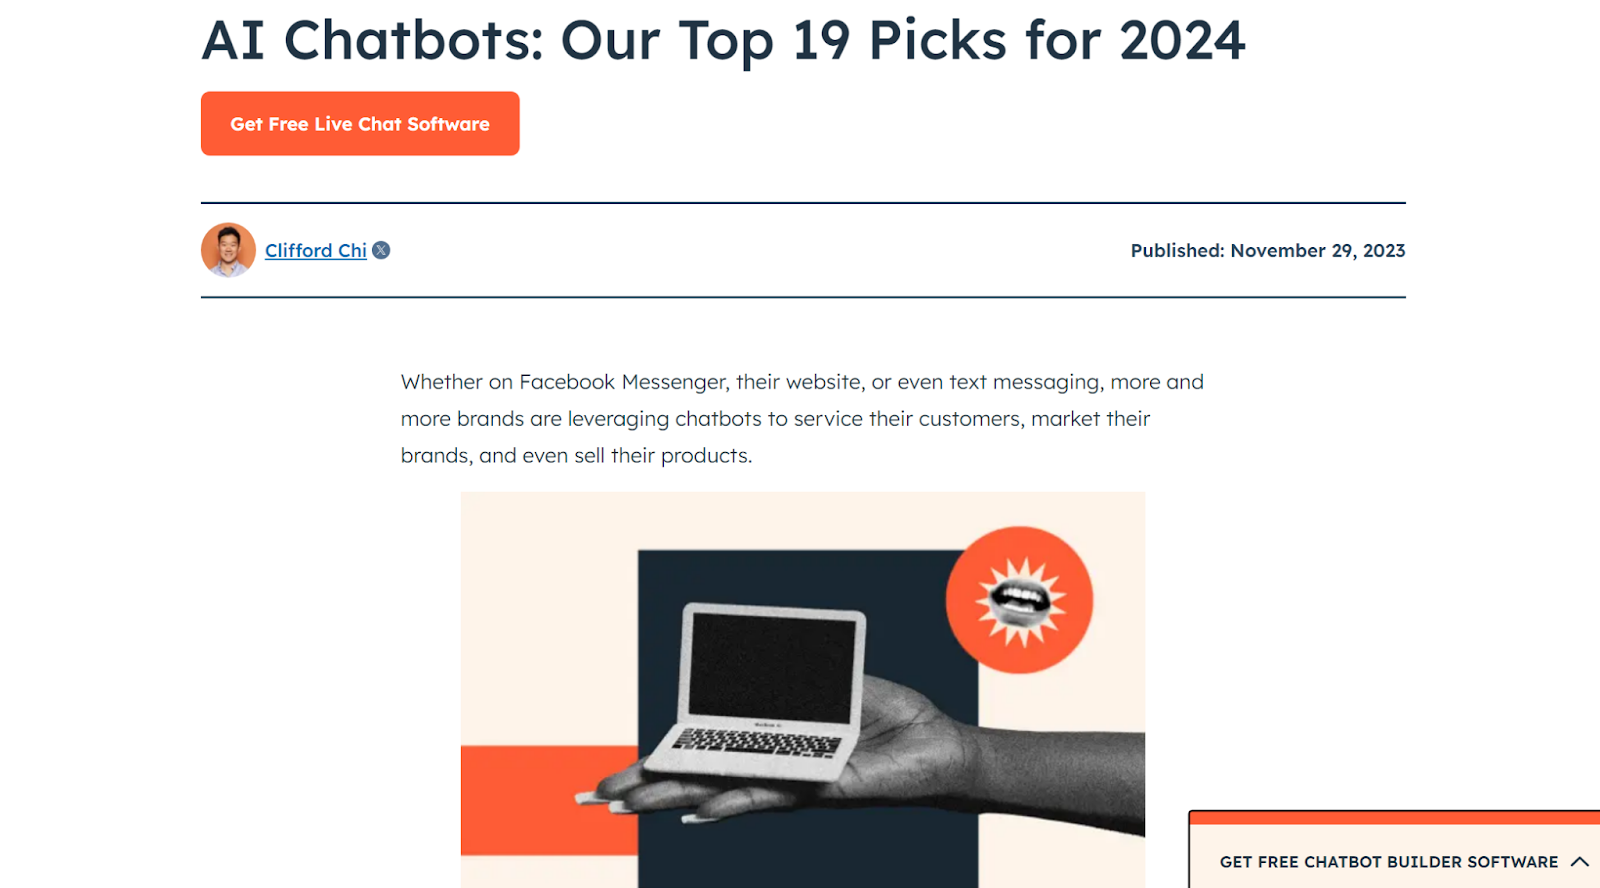 The header section of a HubSpot article titled "AI Chatbots: Our Top 19 Picks for 2024."